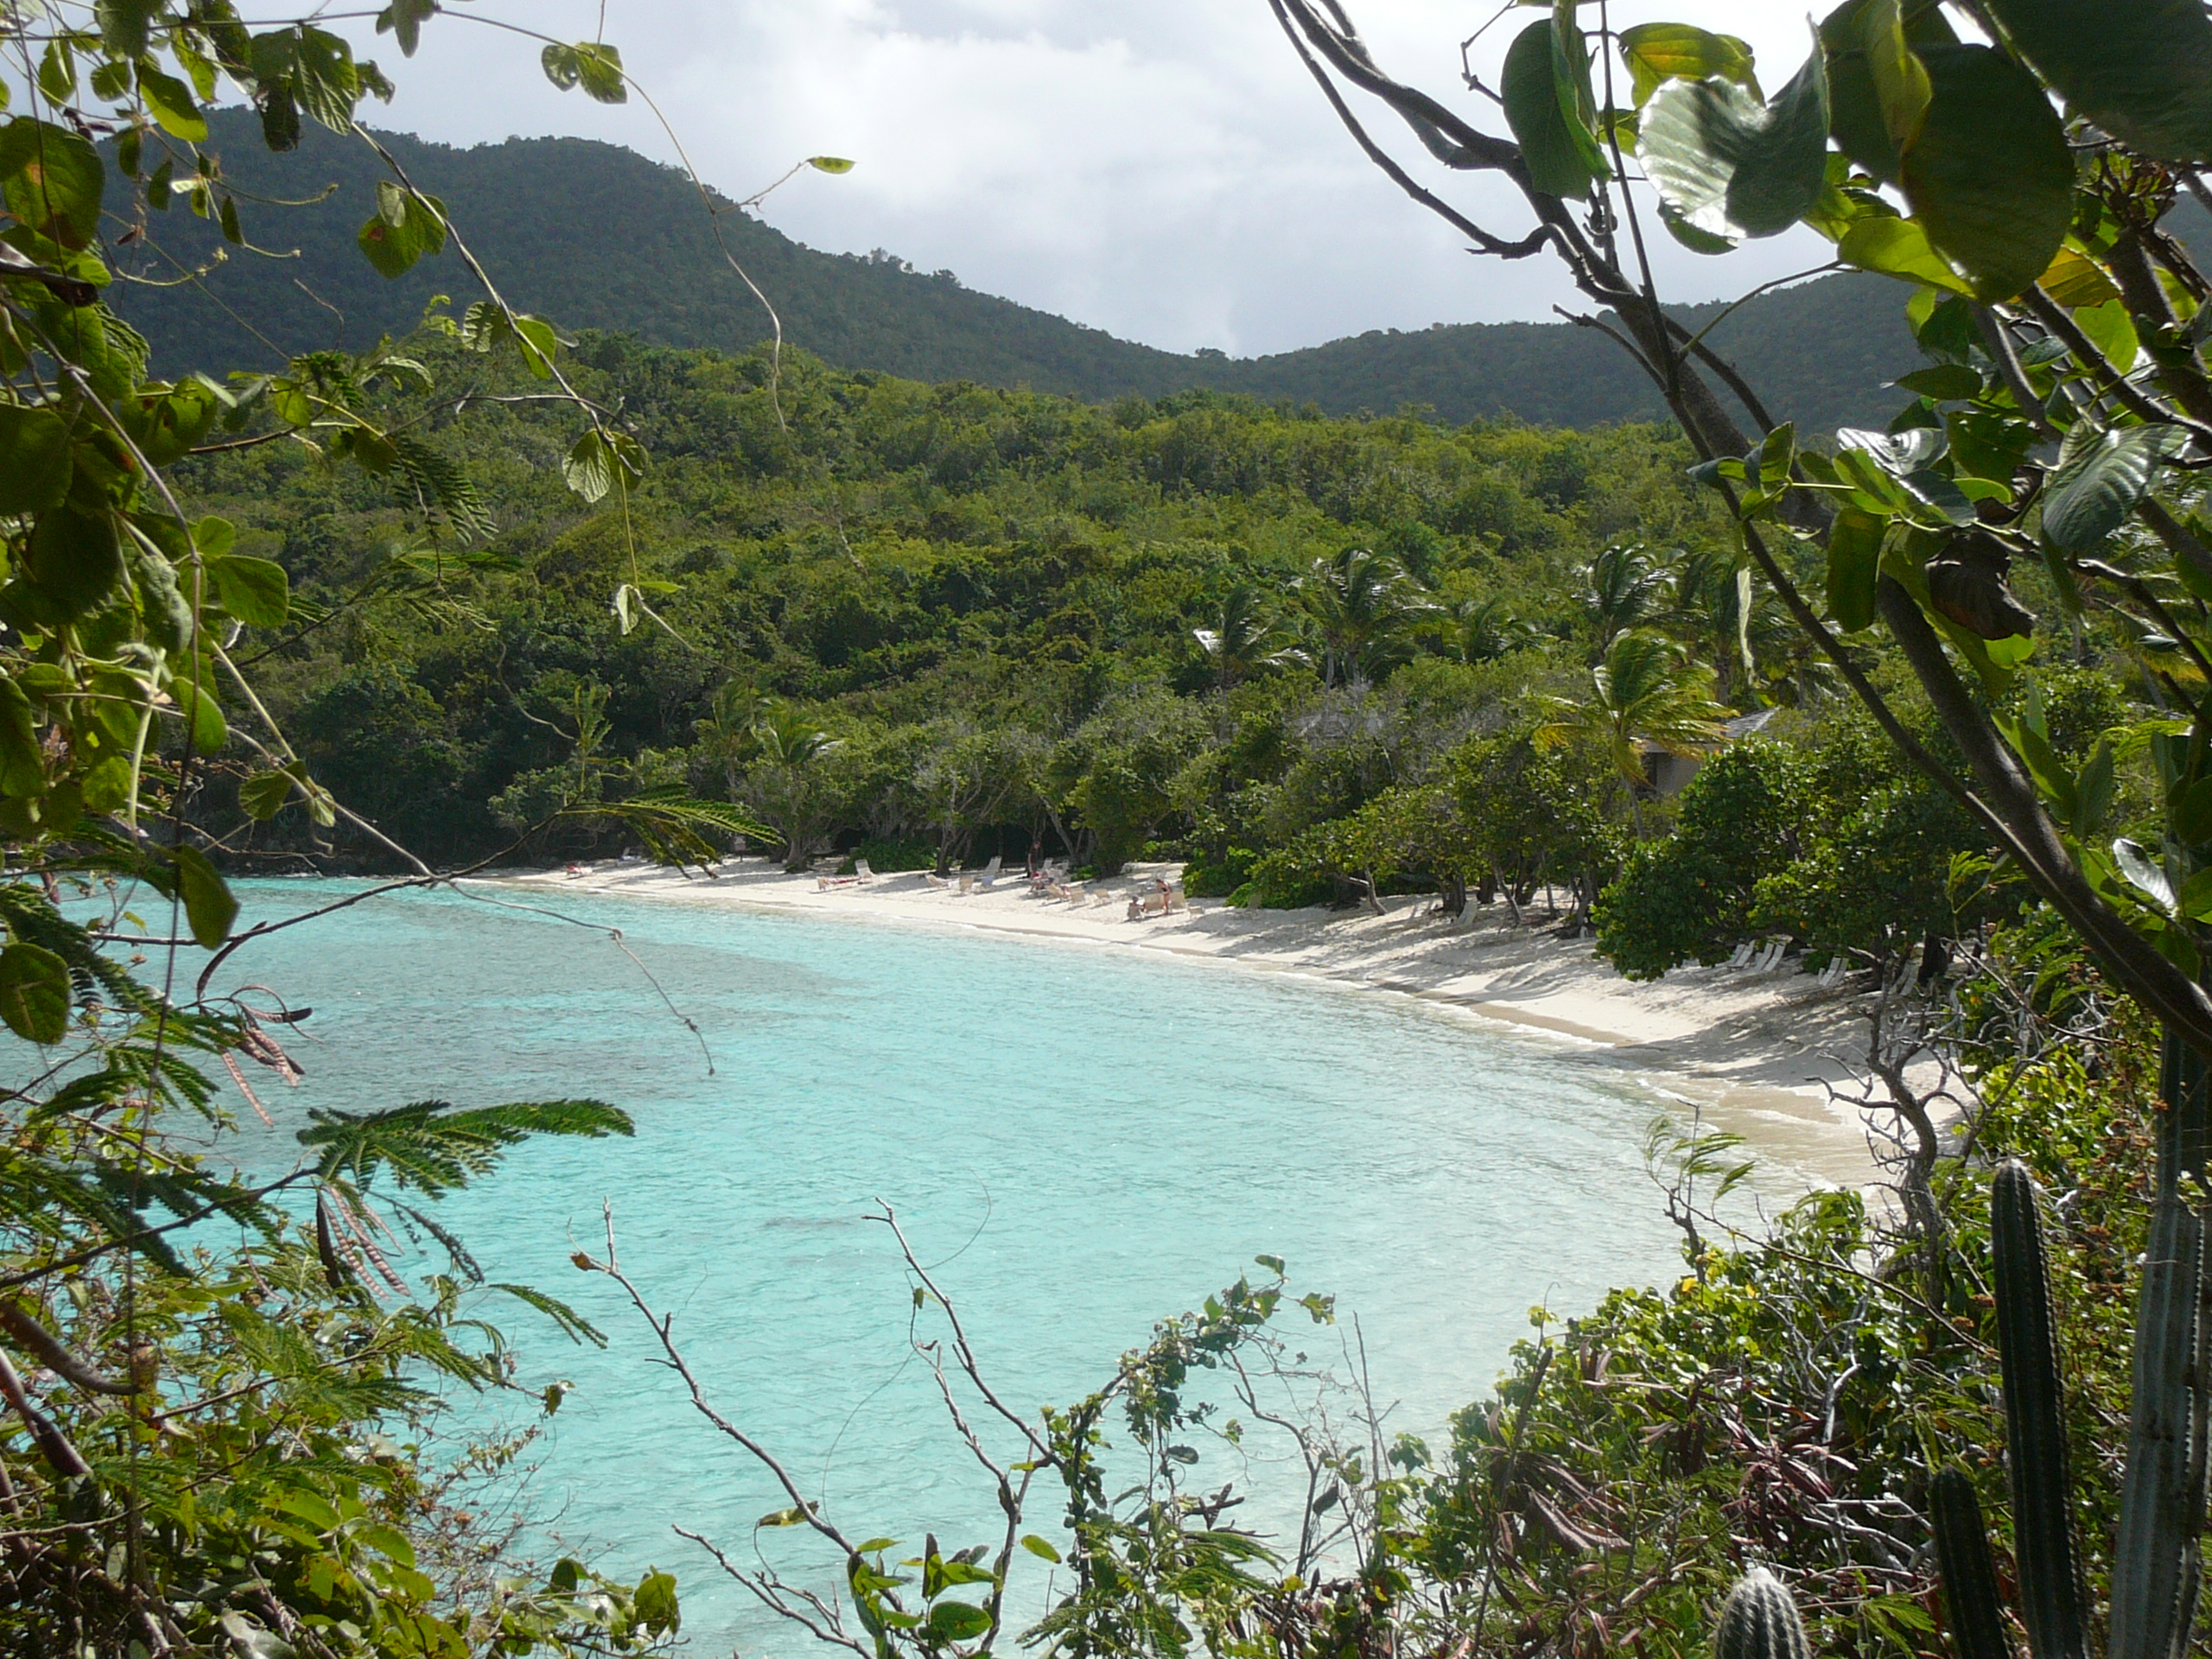 The teal waters off Caneel's Hawksnest Beach photographed through thick green foliage from Mary's Trail.